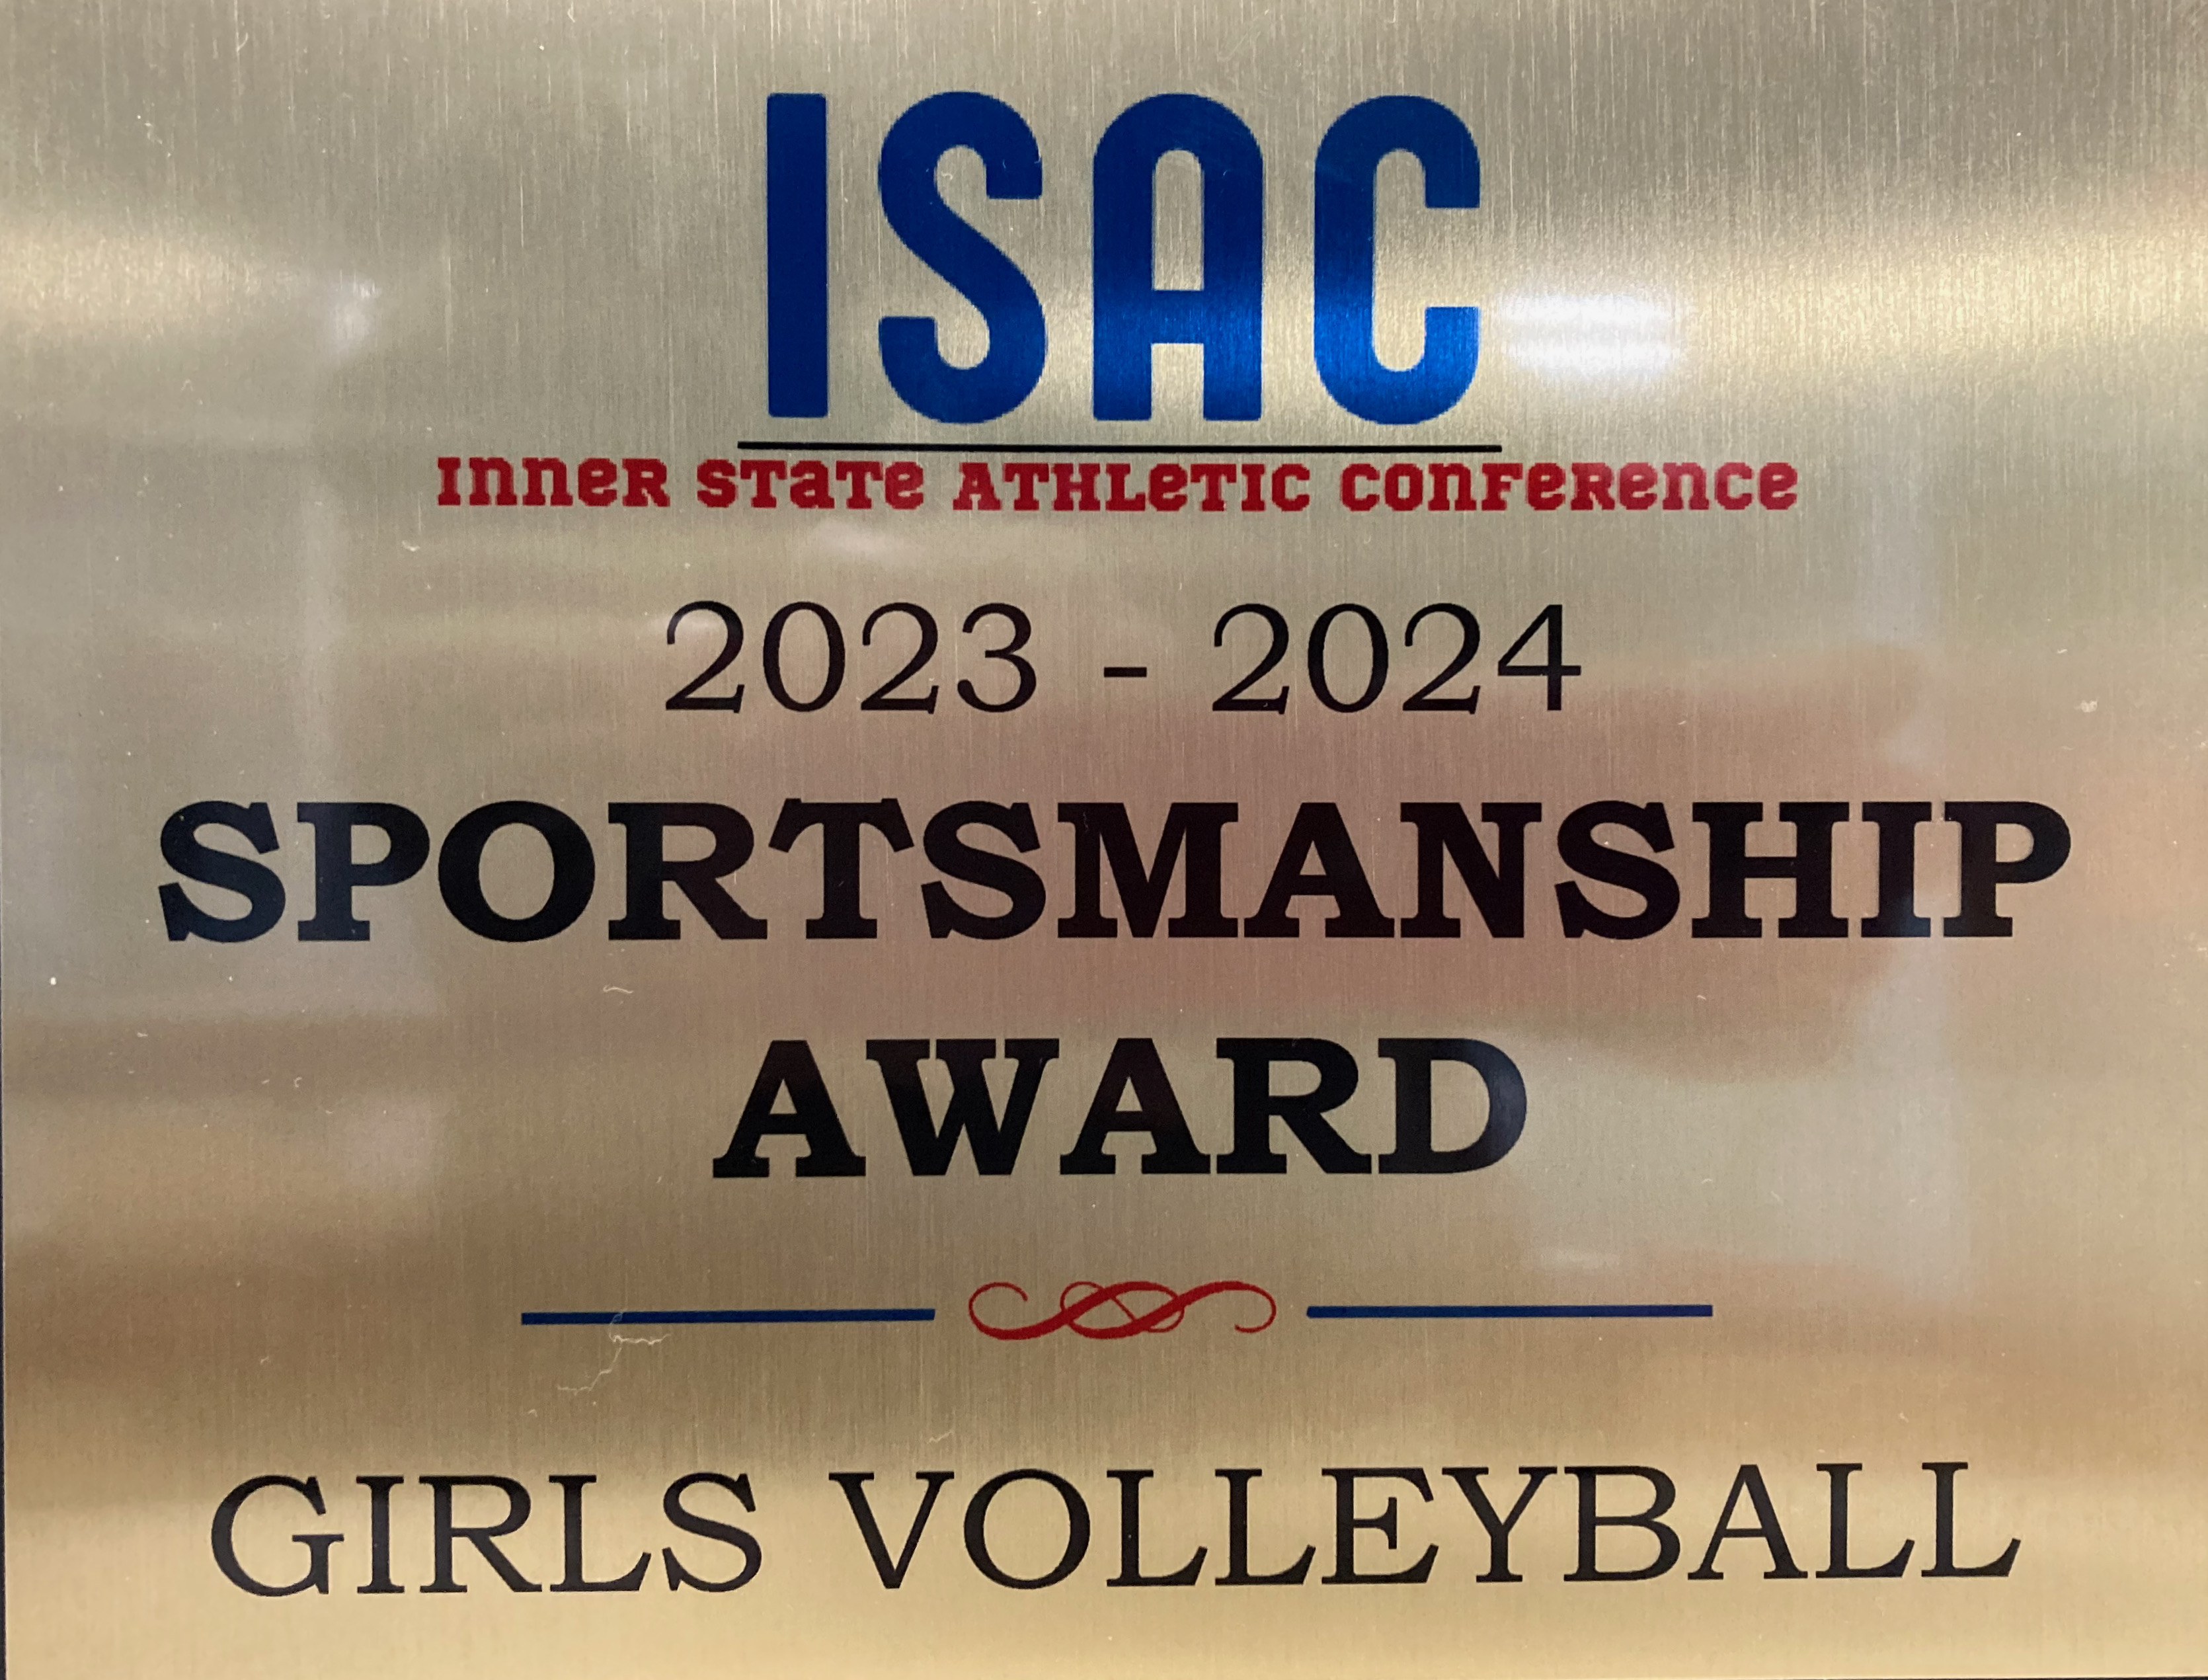 ISAC inner state athletic conference 2023-2024 sportsmanship award girls volleyball